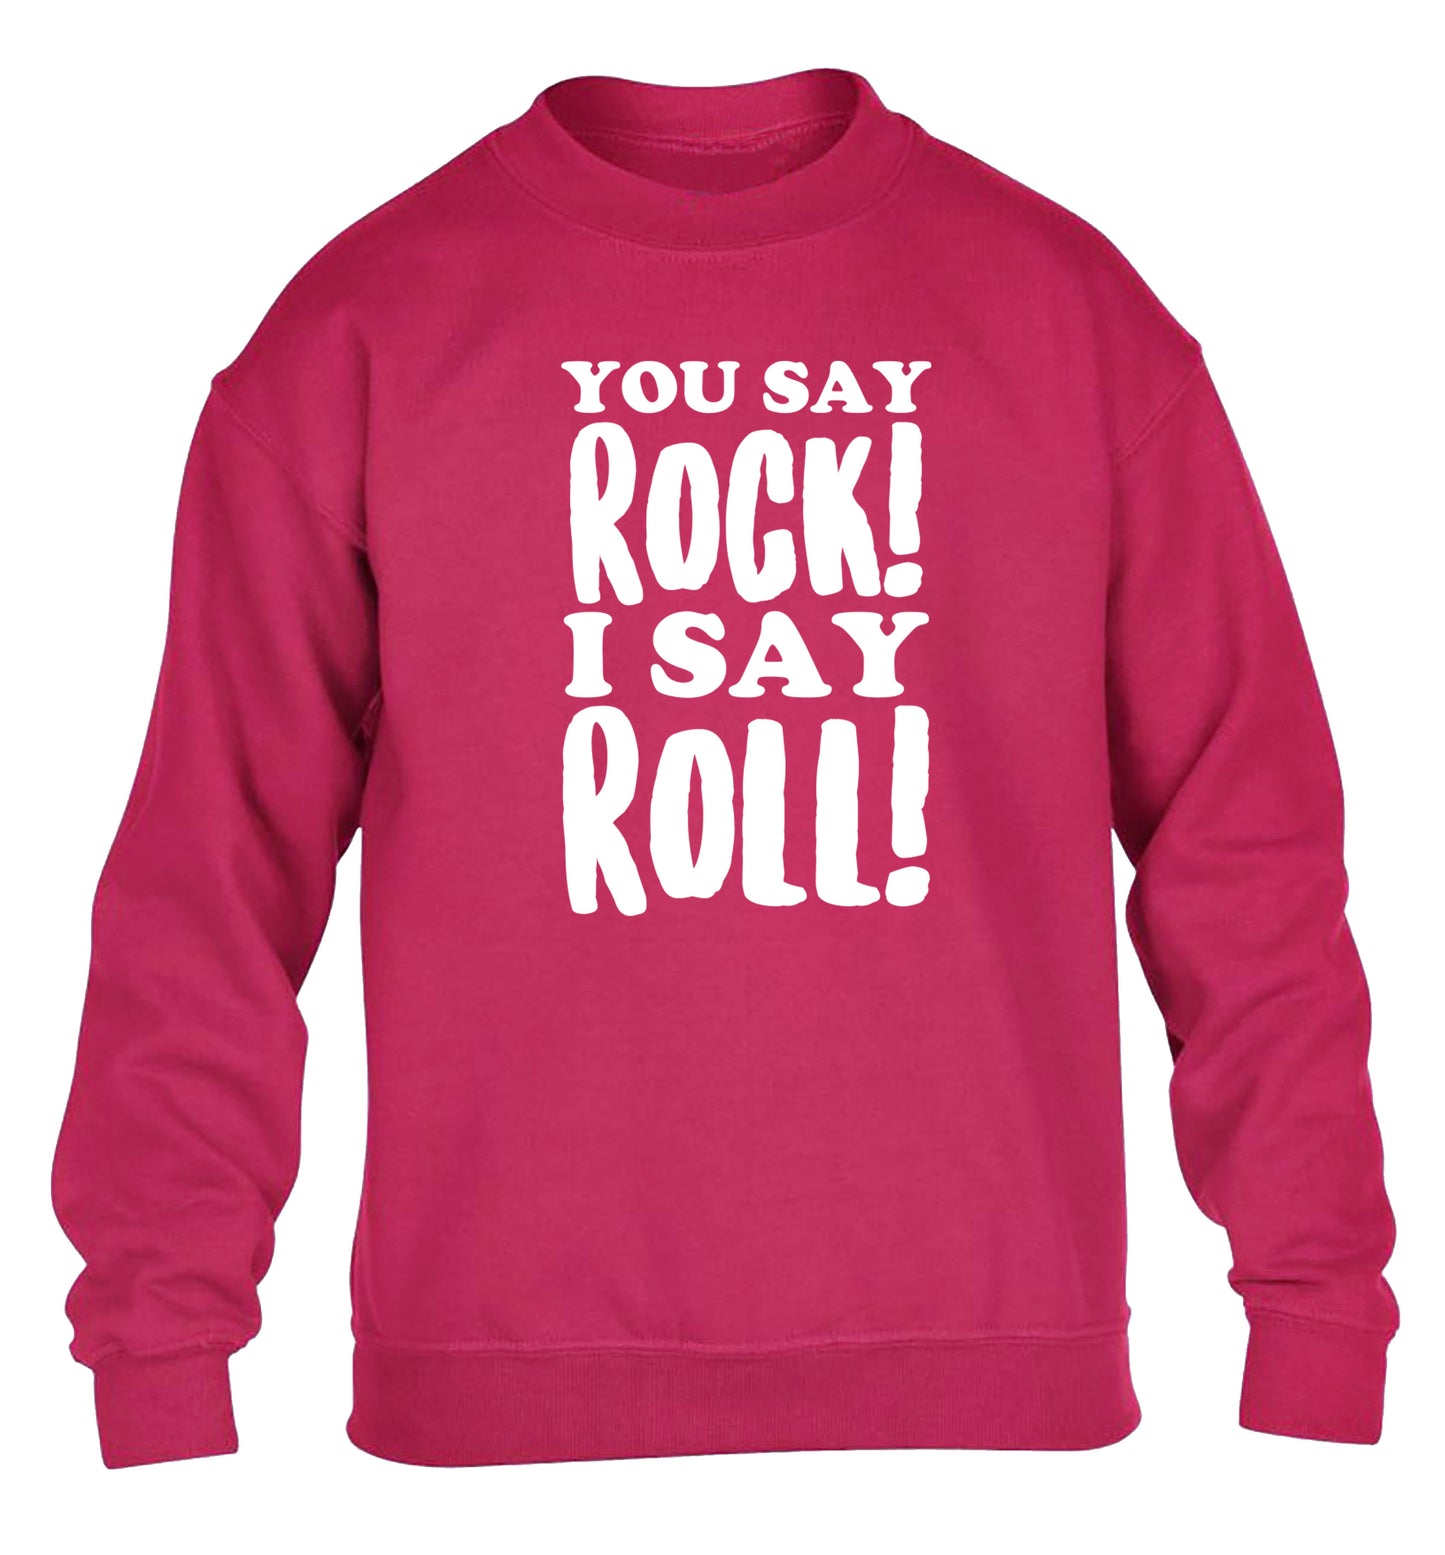 You say rock I say roll! children's pink sweater 12-14 Years